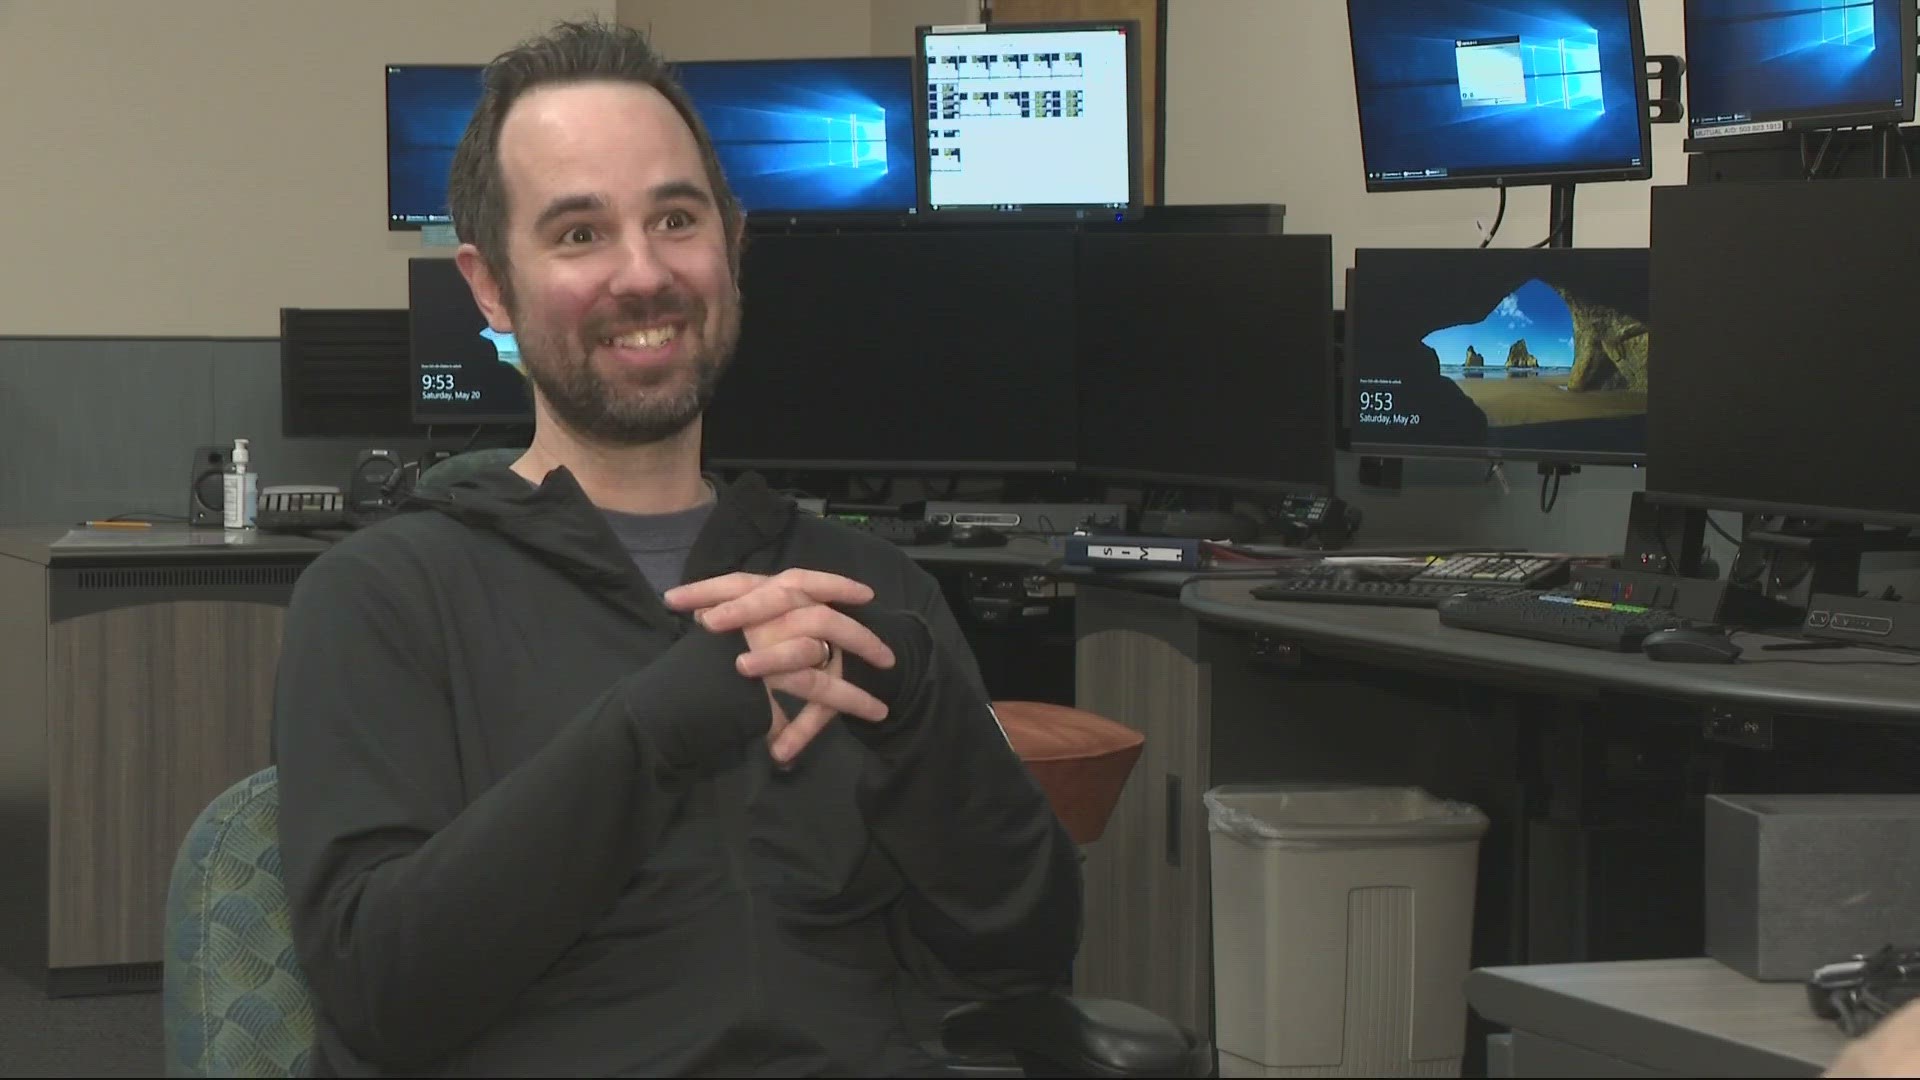 A 911 dispatcher from Portland has won a big award. Stephen Zipprich was named the "911 Dispatcher of the Year” in competition covering North America.